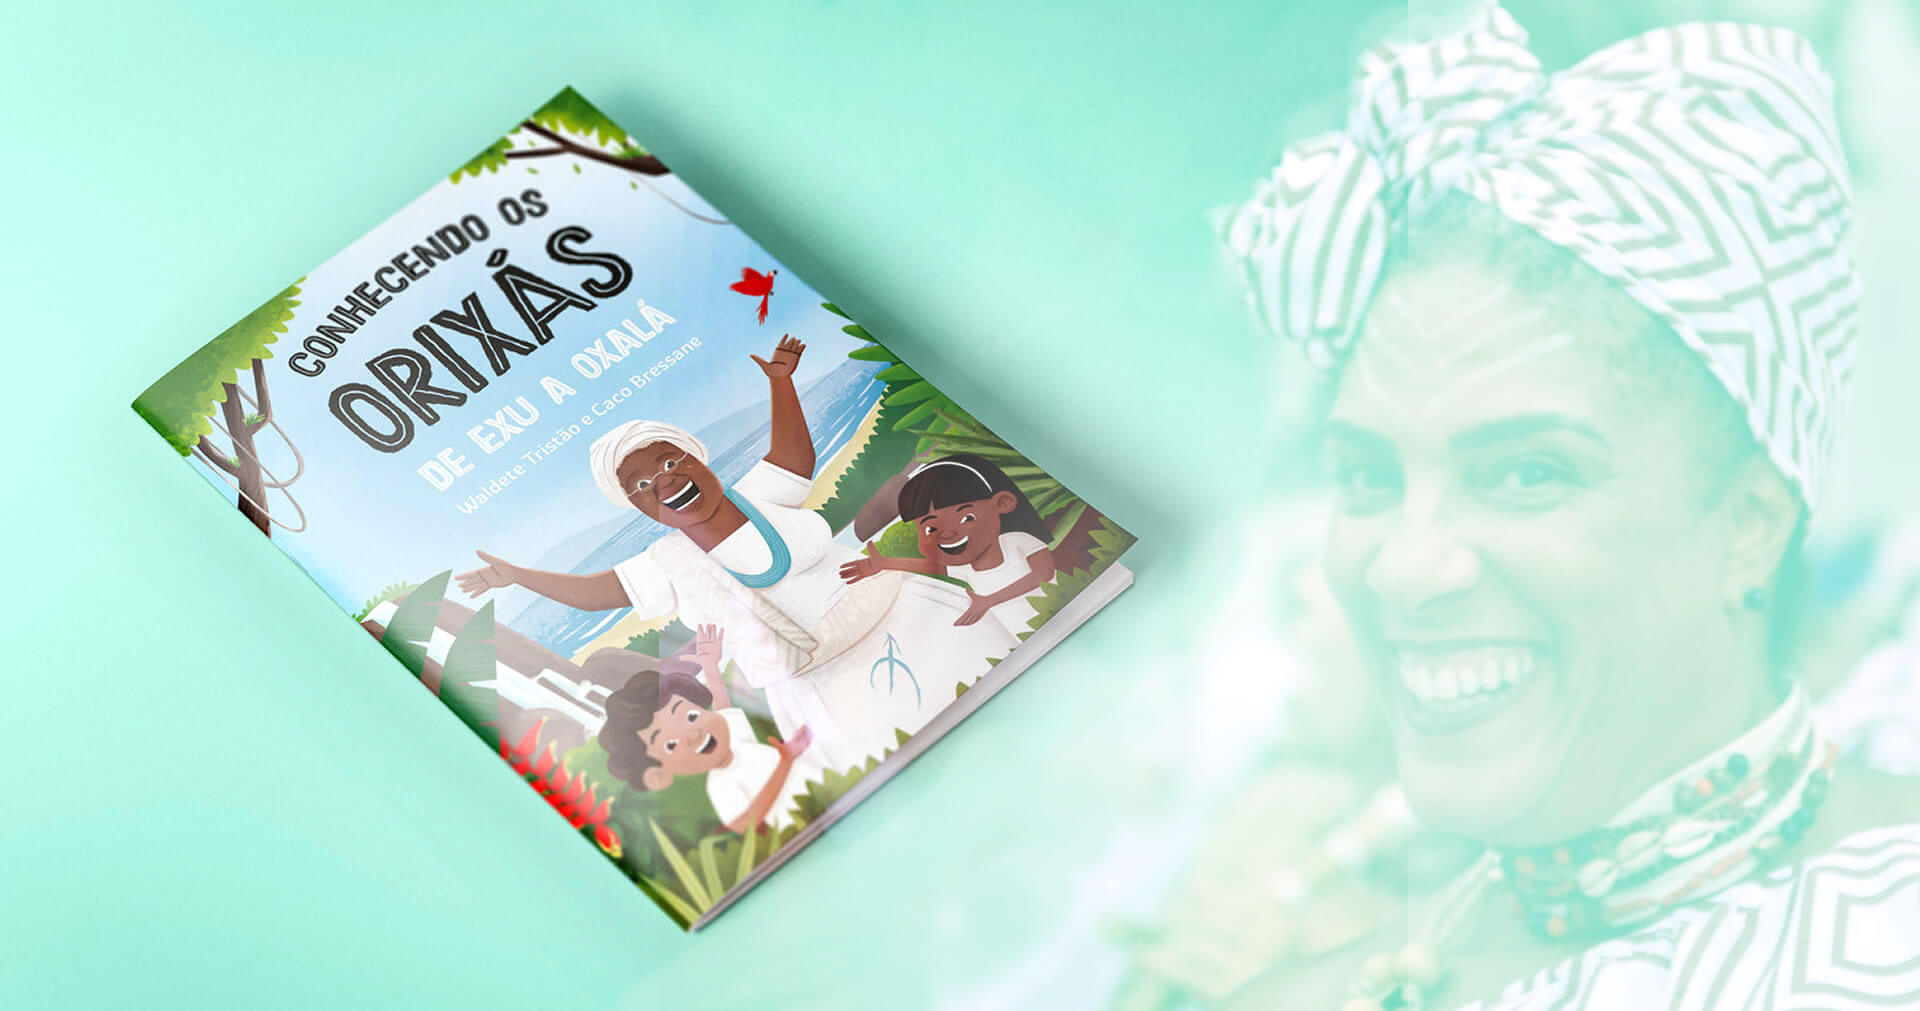 Clipping | Children book's author brings African mythology into elementary schools